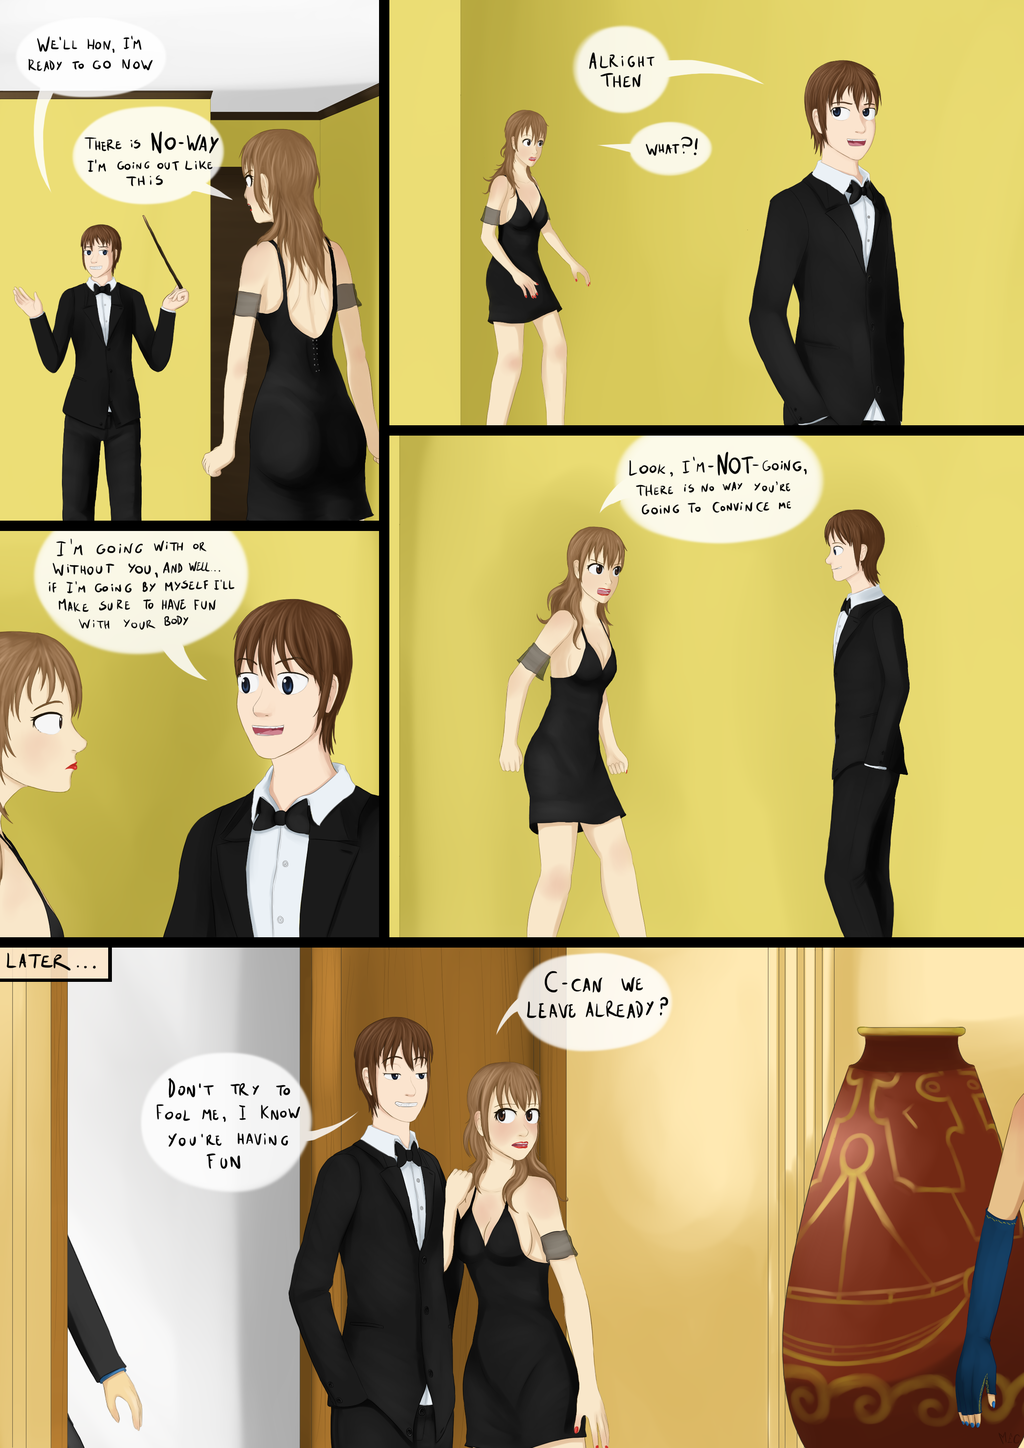 A night out with a difference - Page 3/3